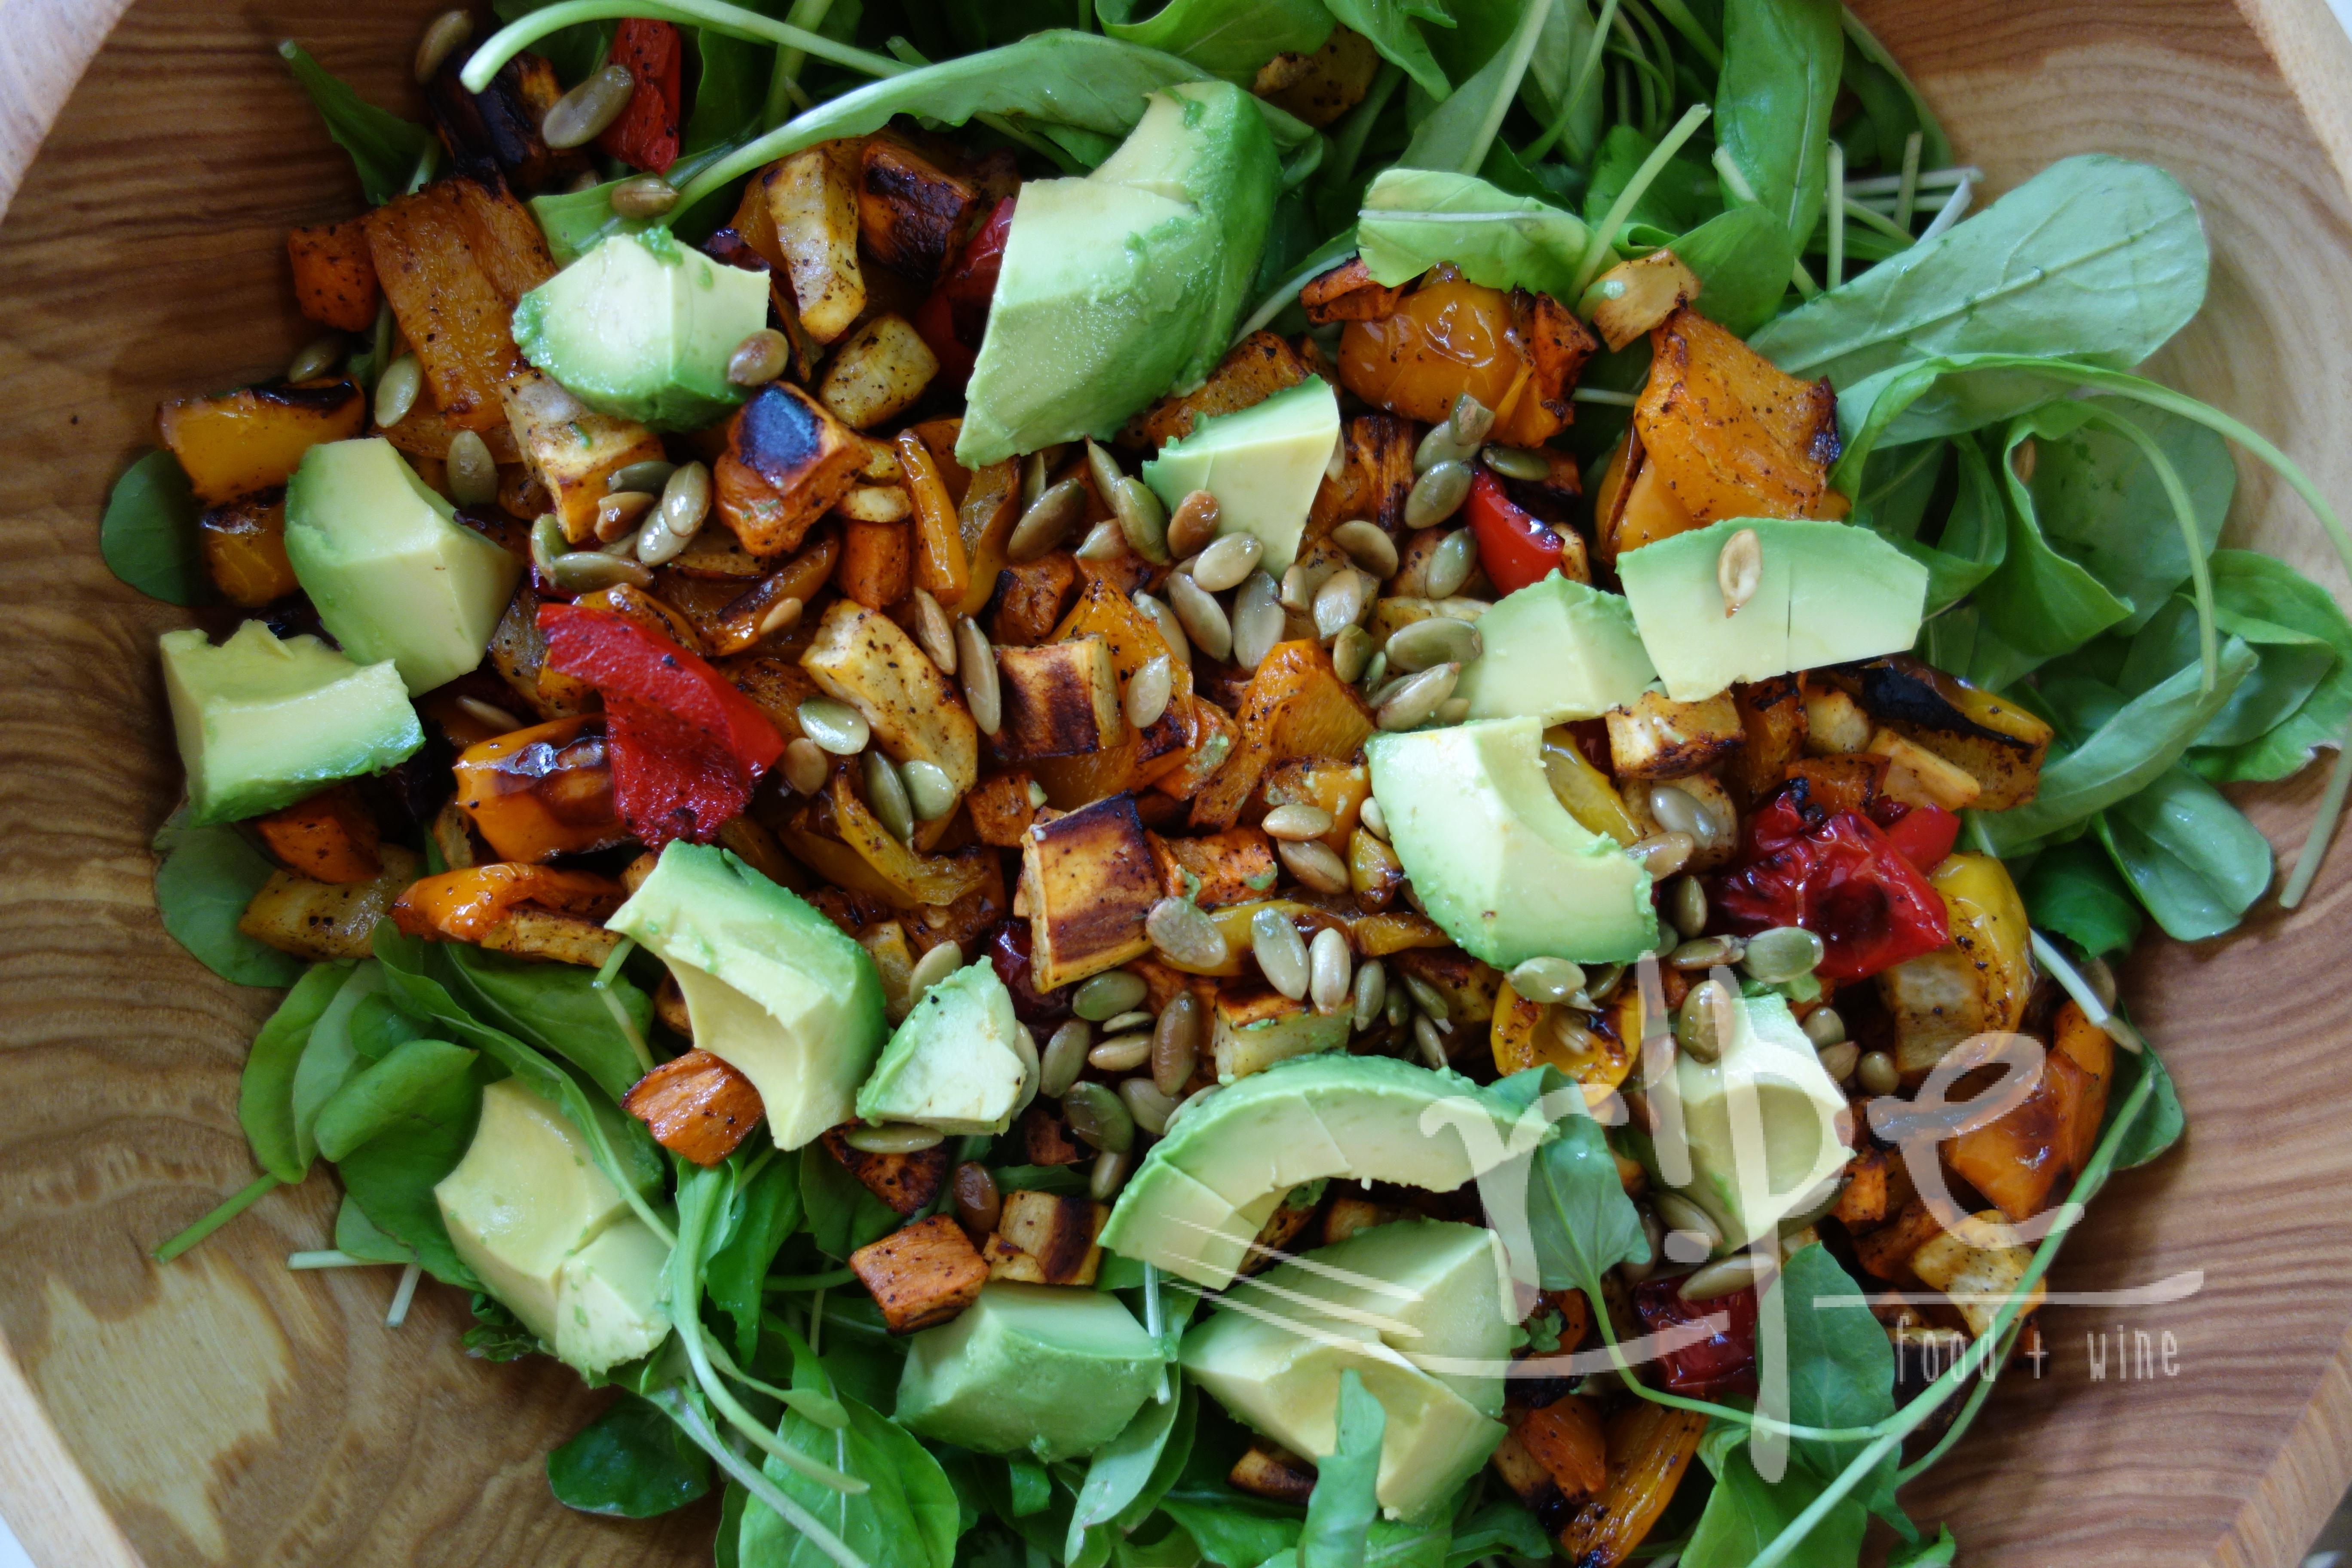 Roasted Sweet Potato Salad with Chipotle-Balsamic Dressing